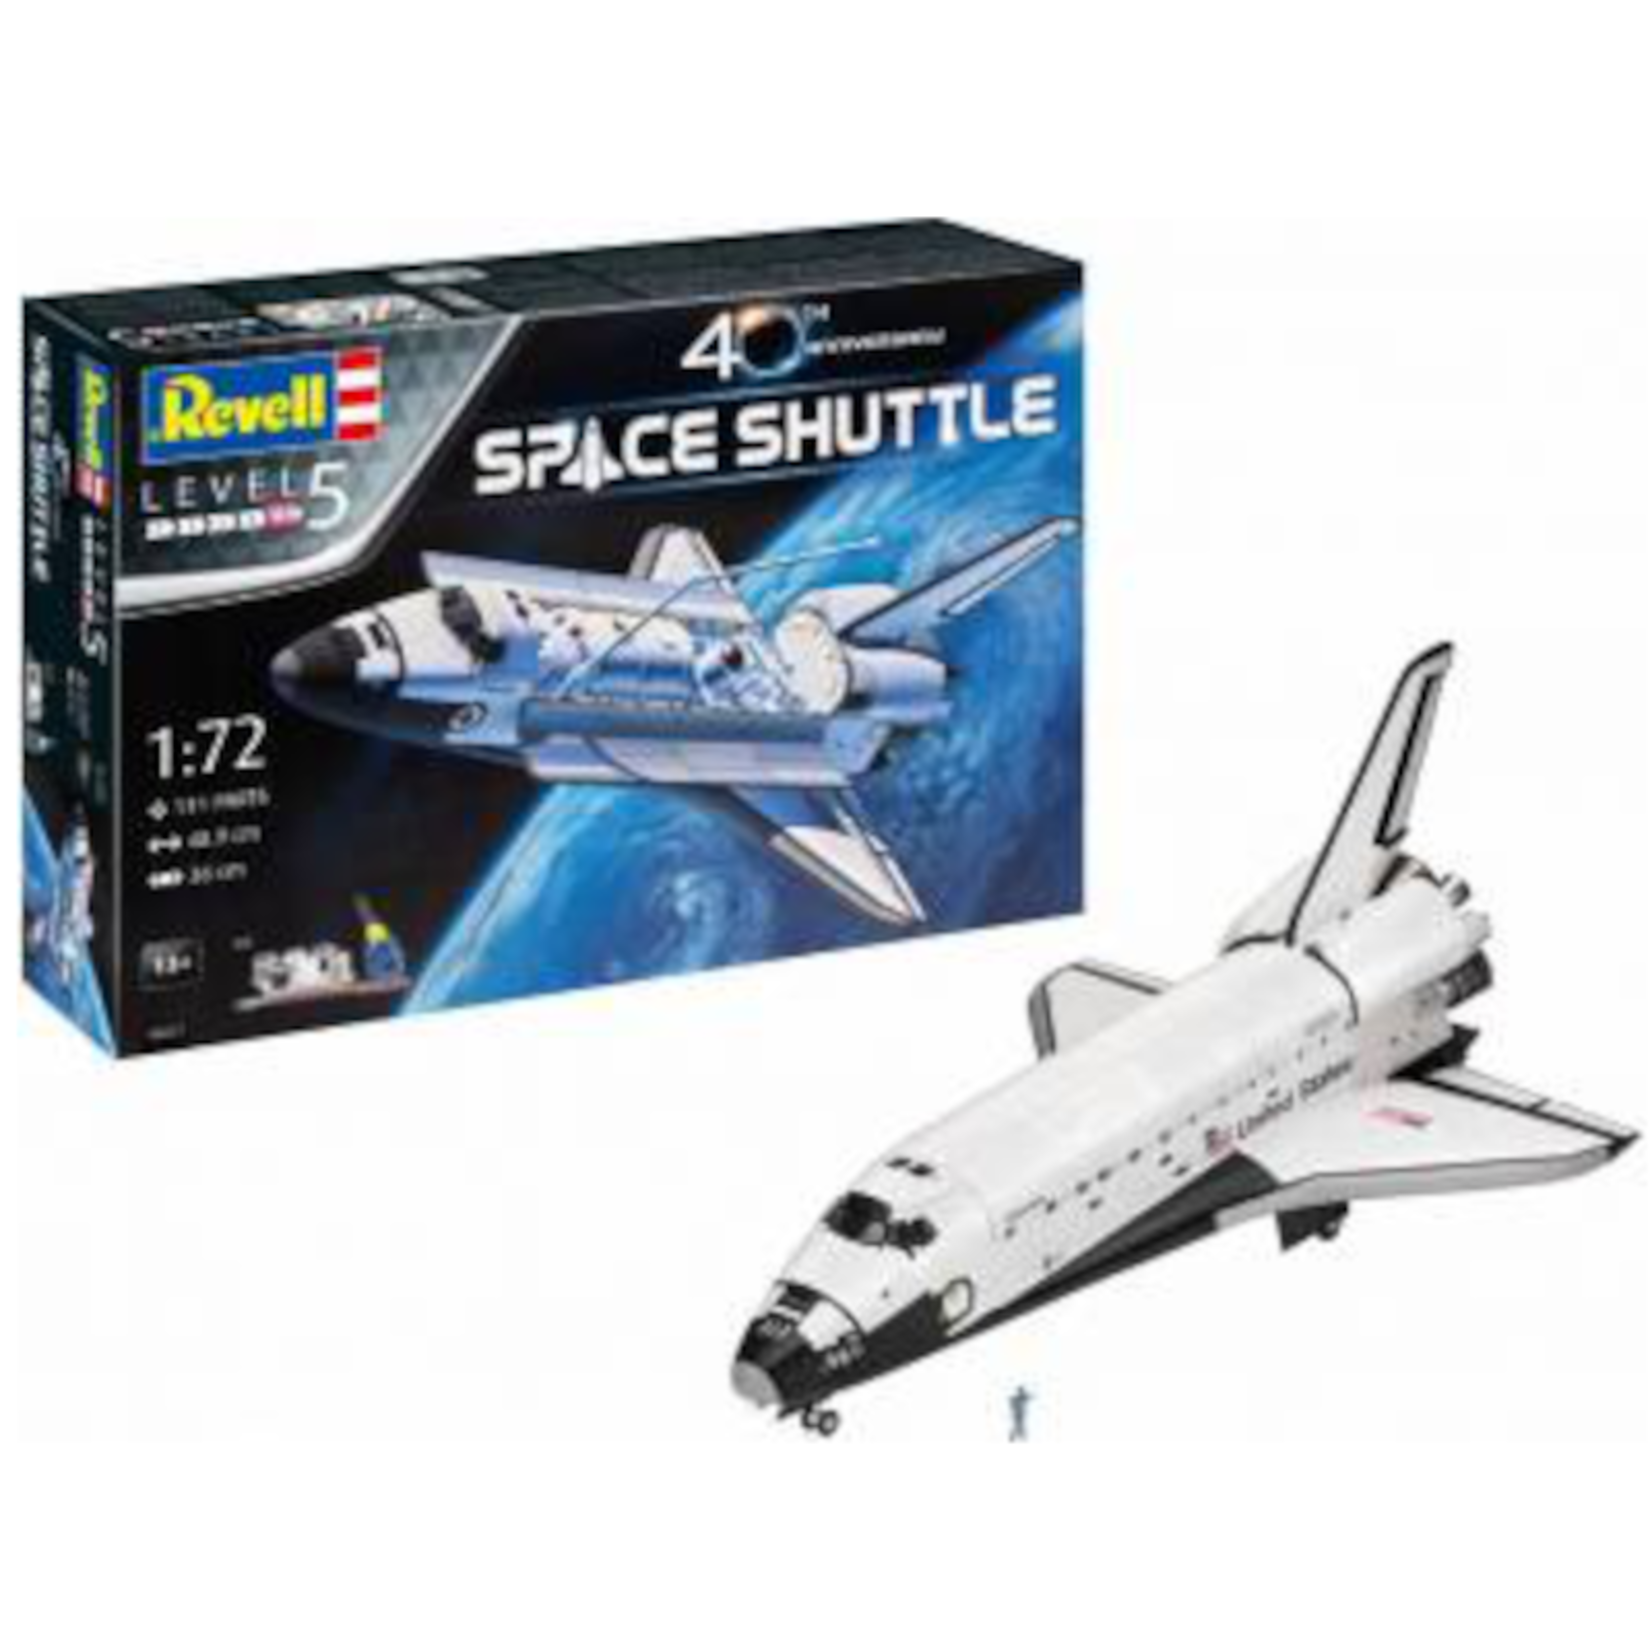 REVELL GERMANY 1/72 SPACE SHUTTLE 40TH ANNIVERSARY